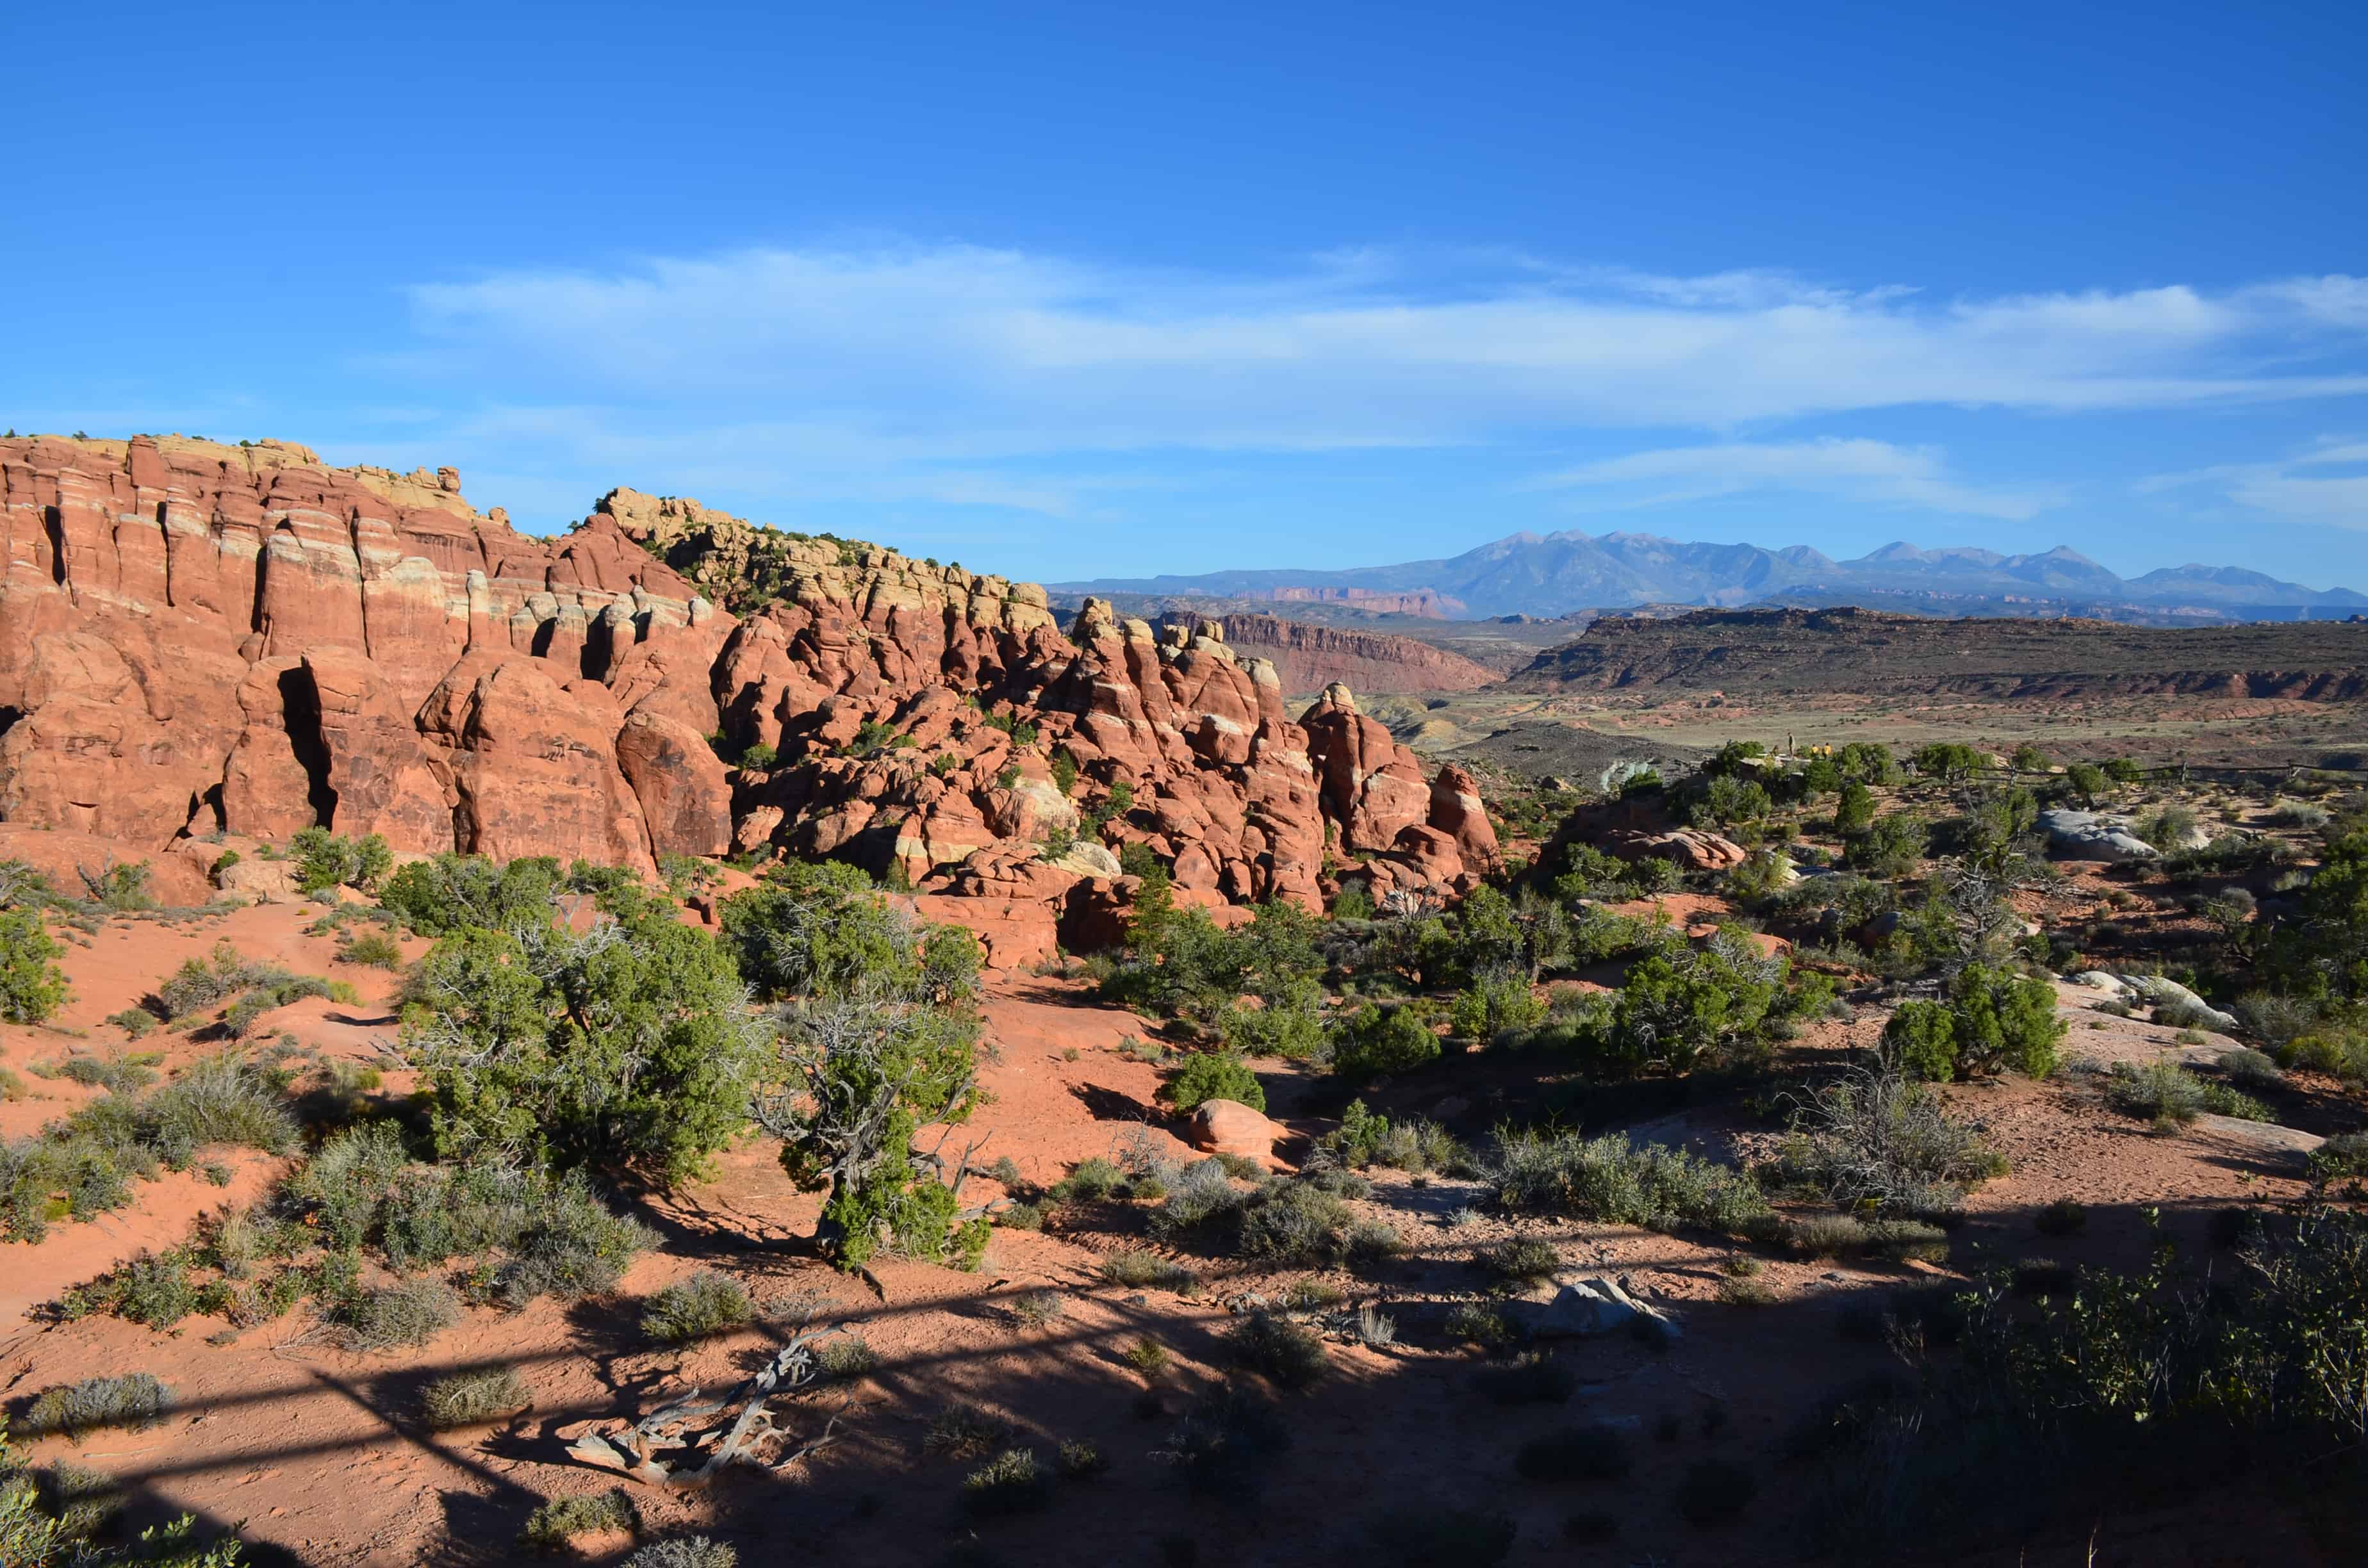 Fiery Furnace at Arches National Park in Utah